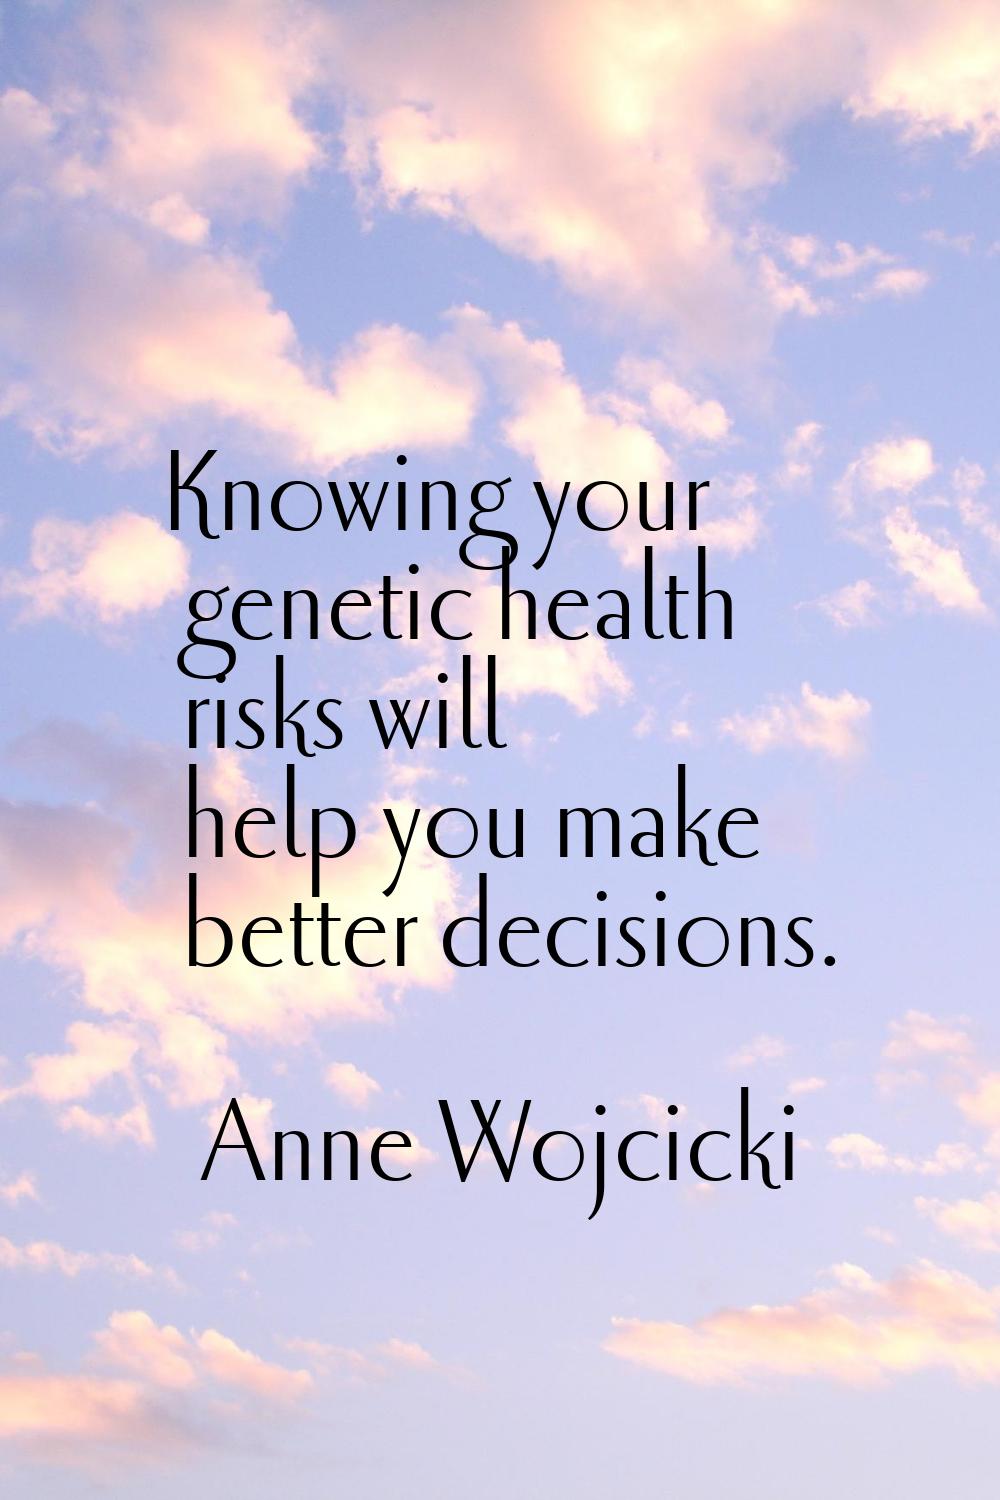 Knowing your genetic health risks will help you make better decisions.